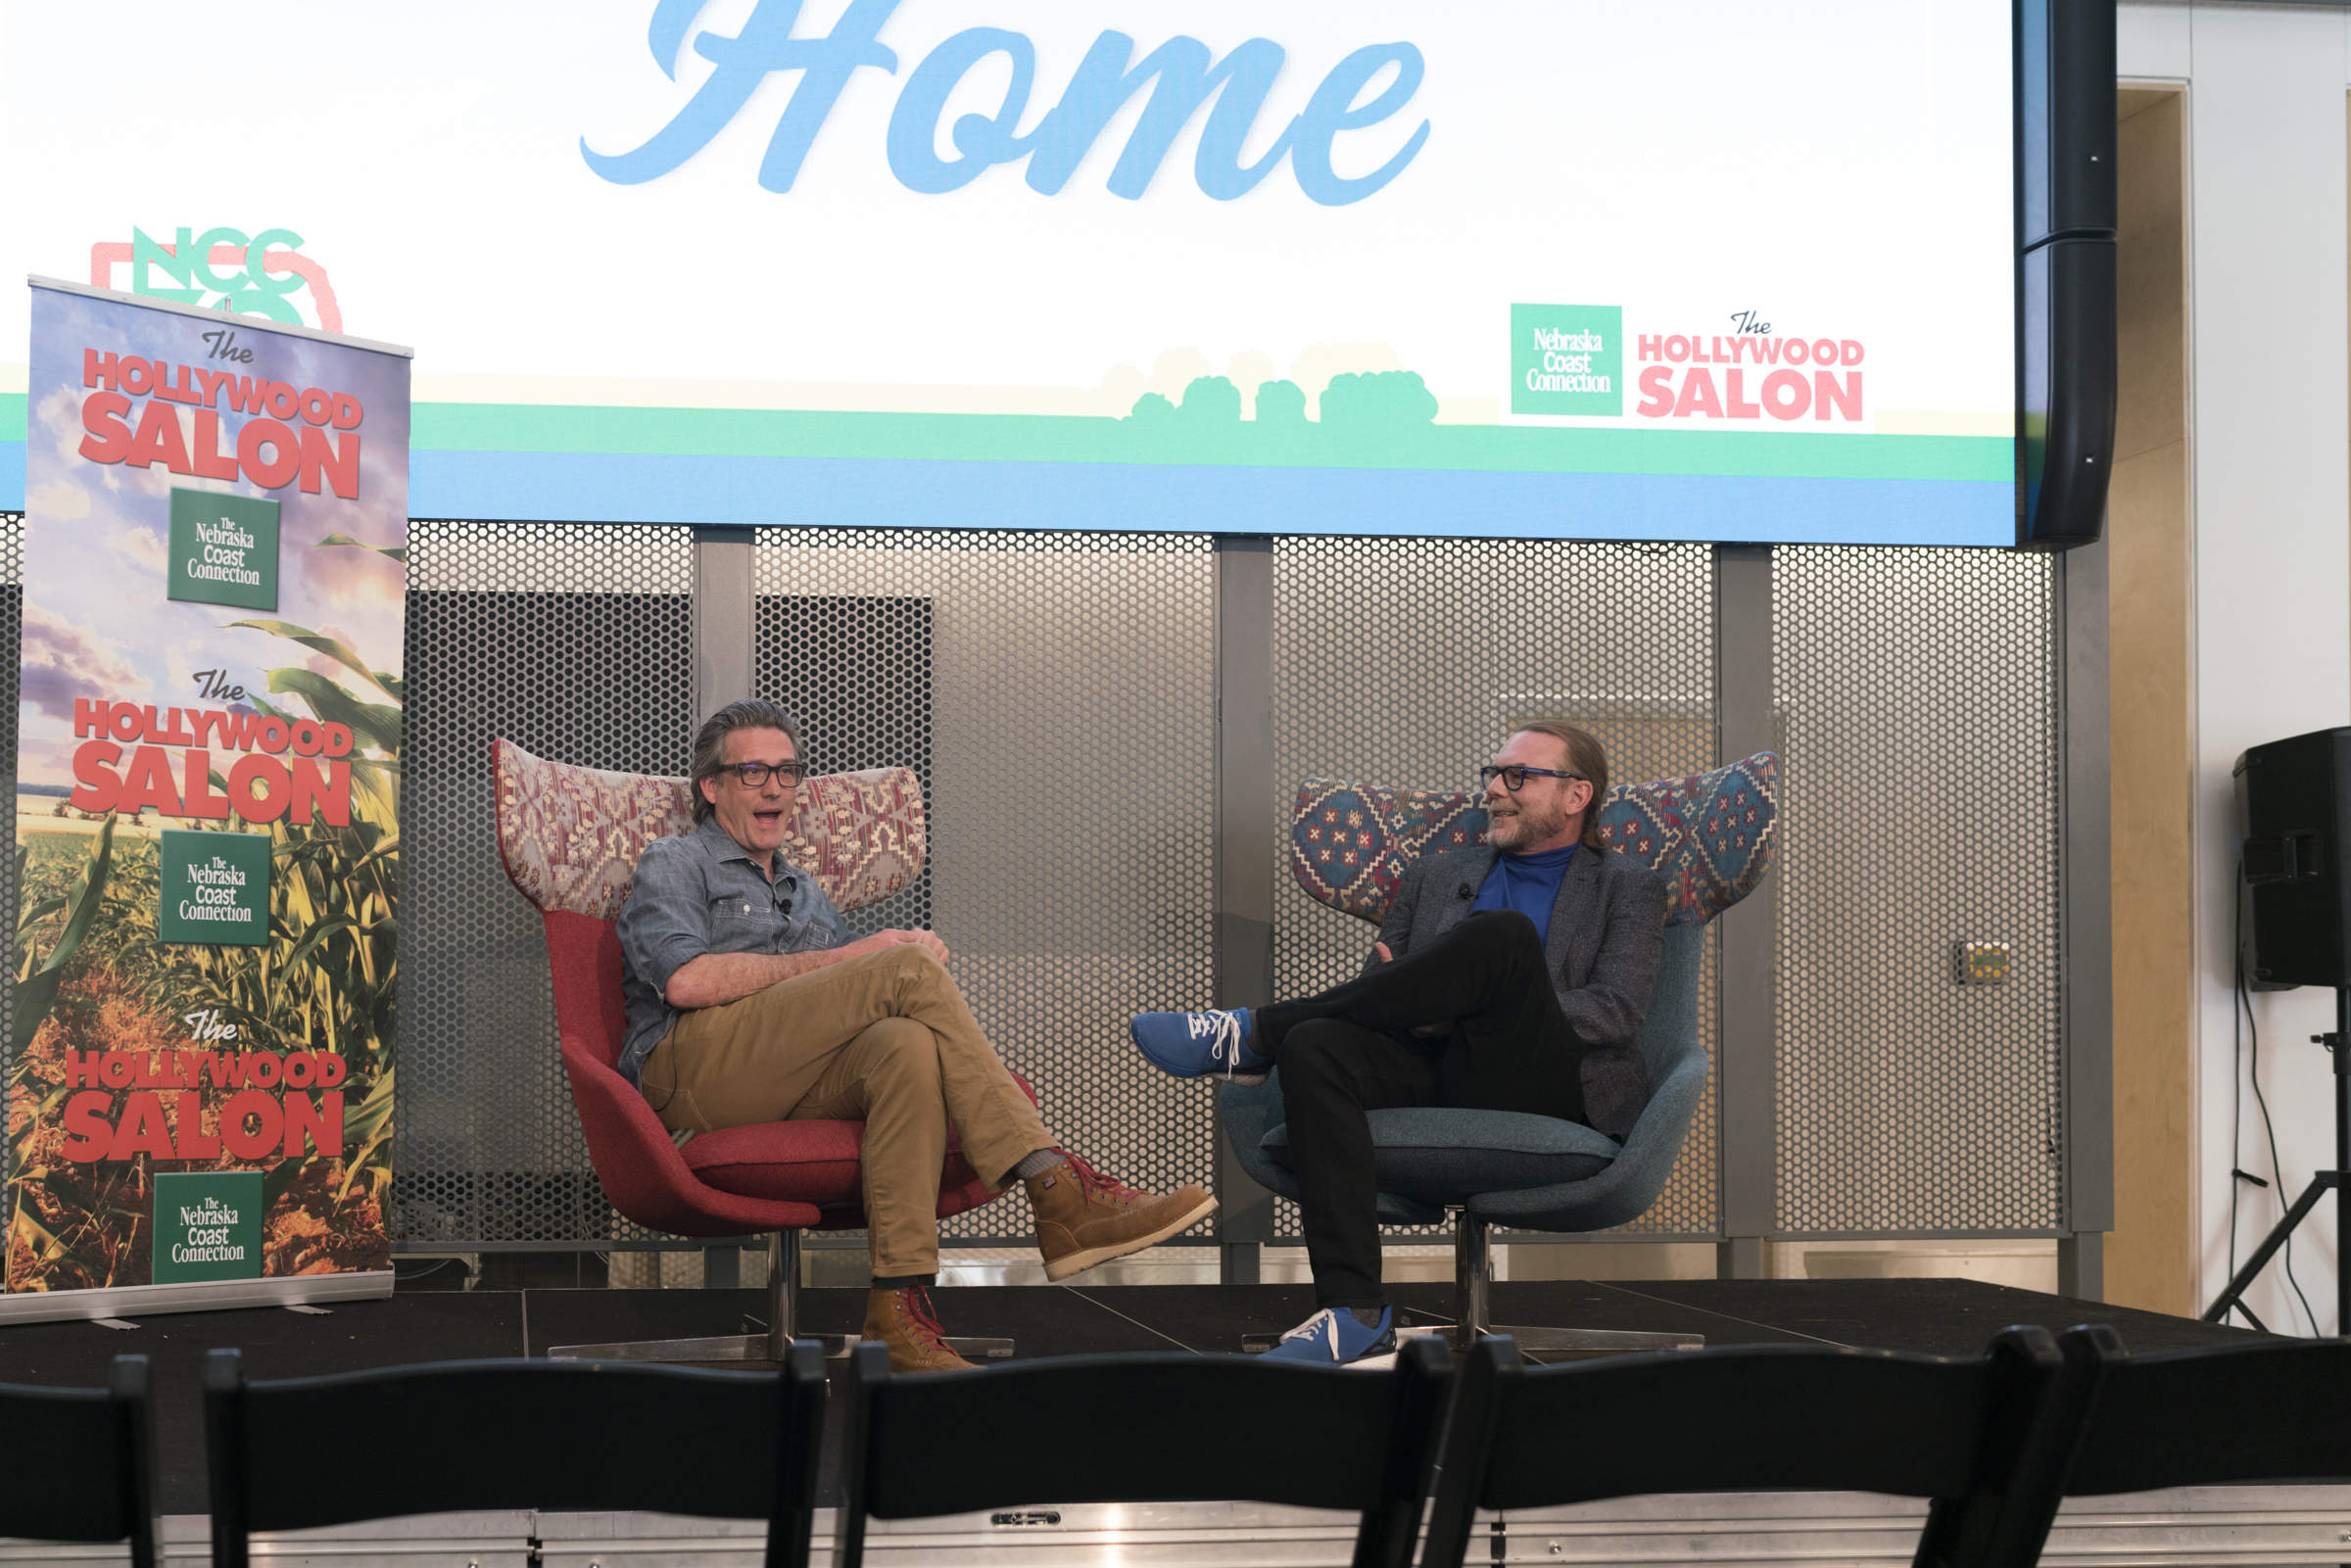 Jon Bokenkamp (left) and Todd Nelson have a conversation during the Nebraska Coast Connection's Hollywood Salon Comes Home event on May 8 at the Johnny Carson Center for Emerging Media Arts. Photo by Laura Cobb.